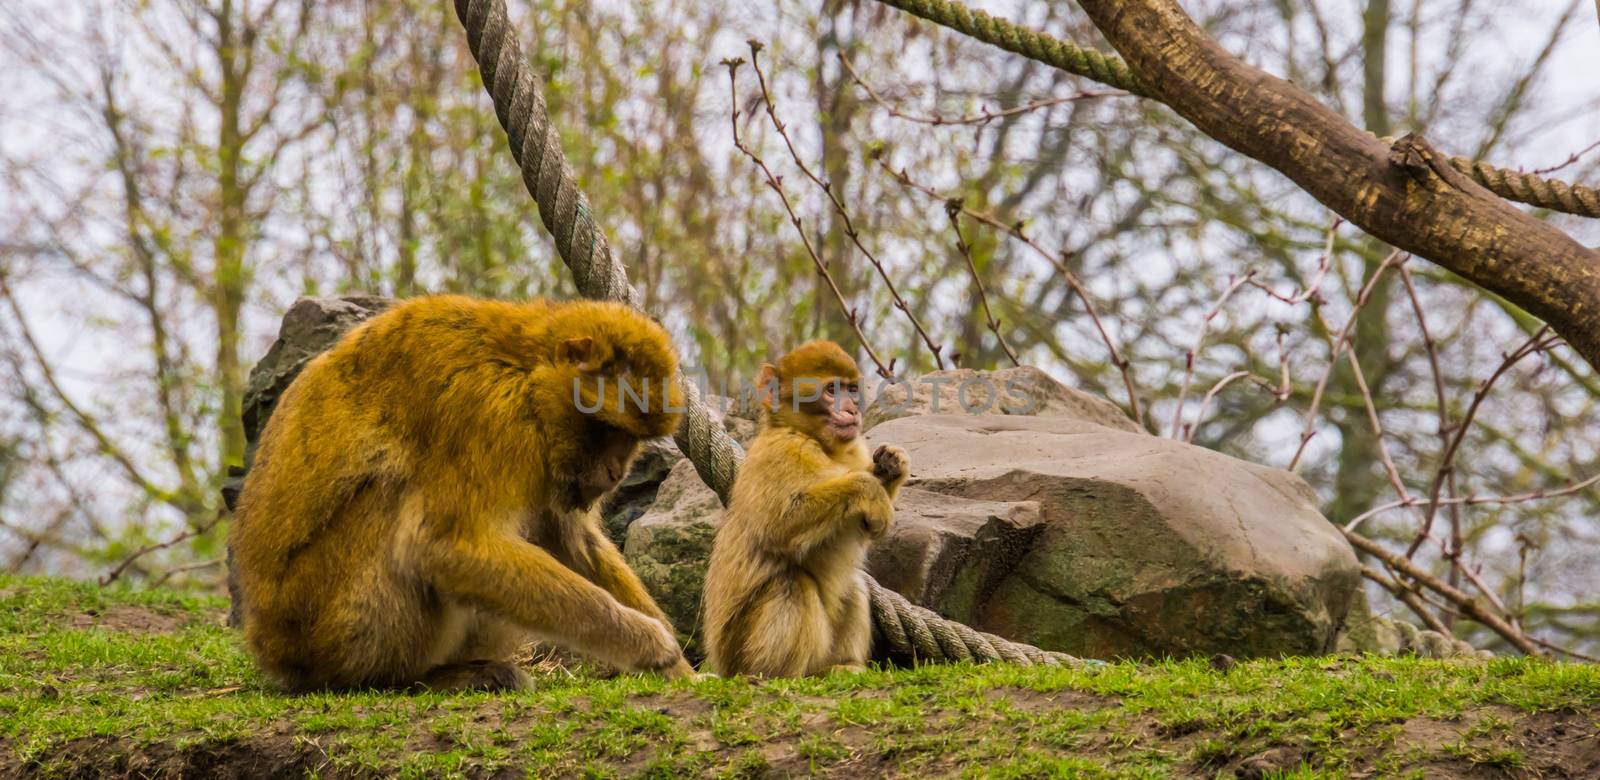 adorable young barbary macaque infant with its mother, Endangered animal specie from Africa by charlottebleijenberg